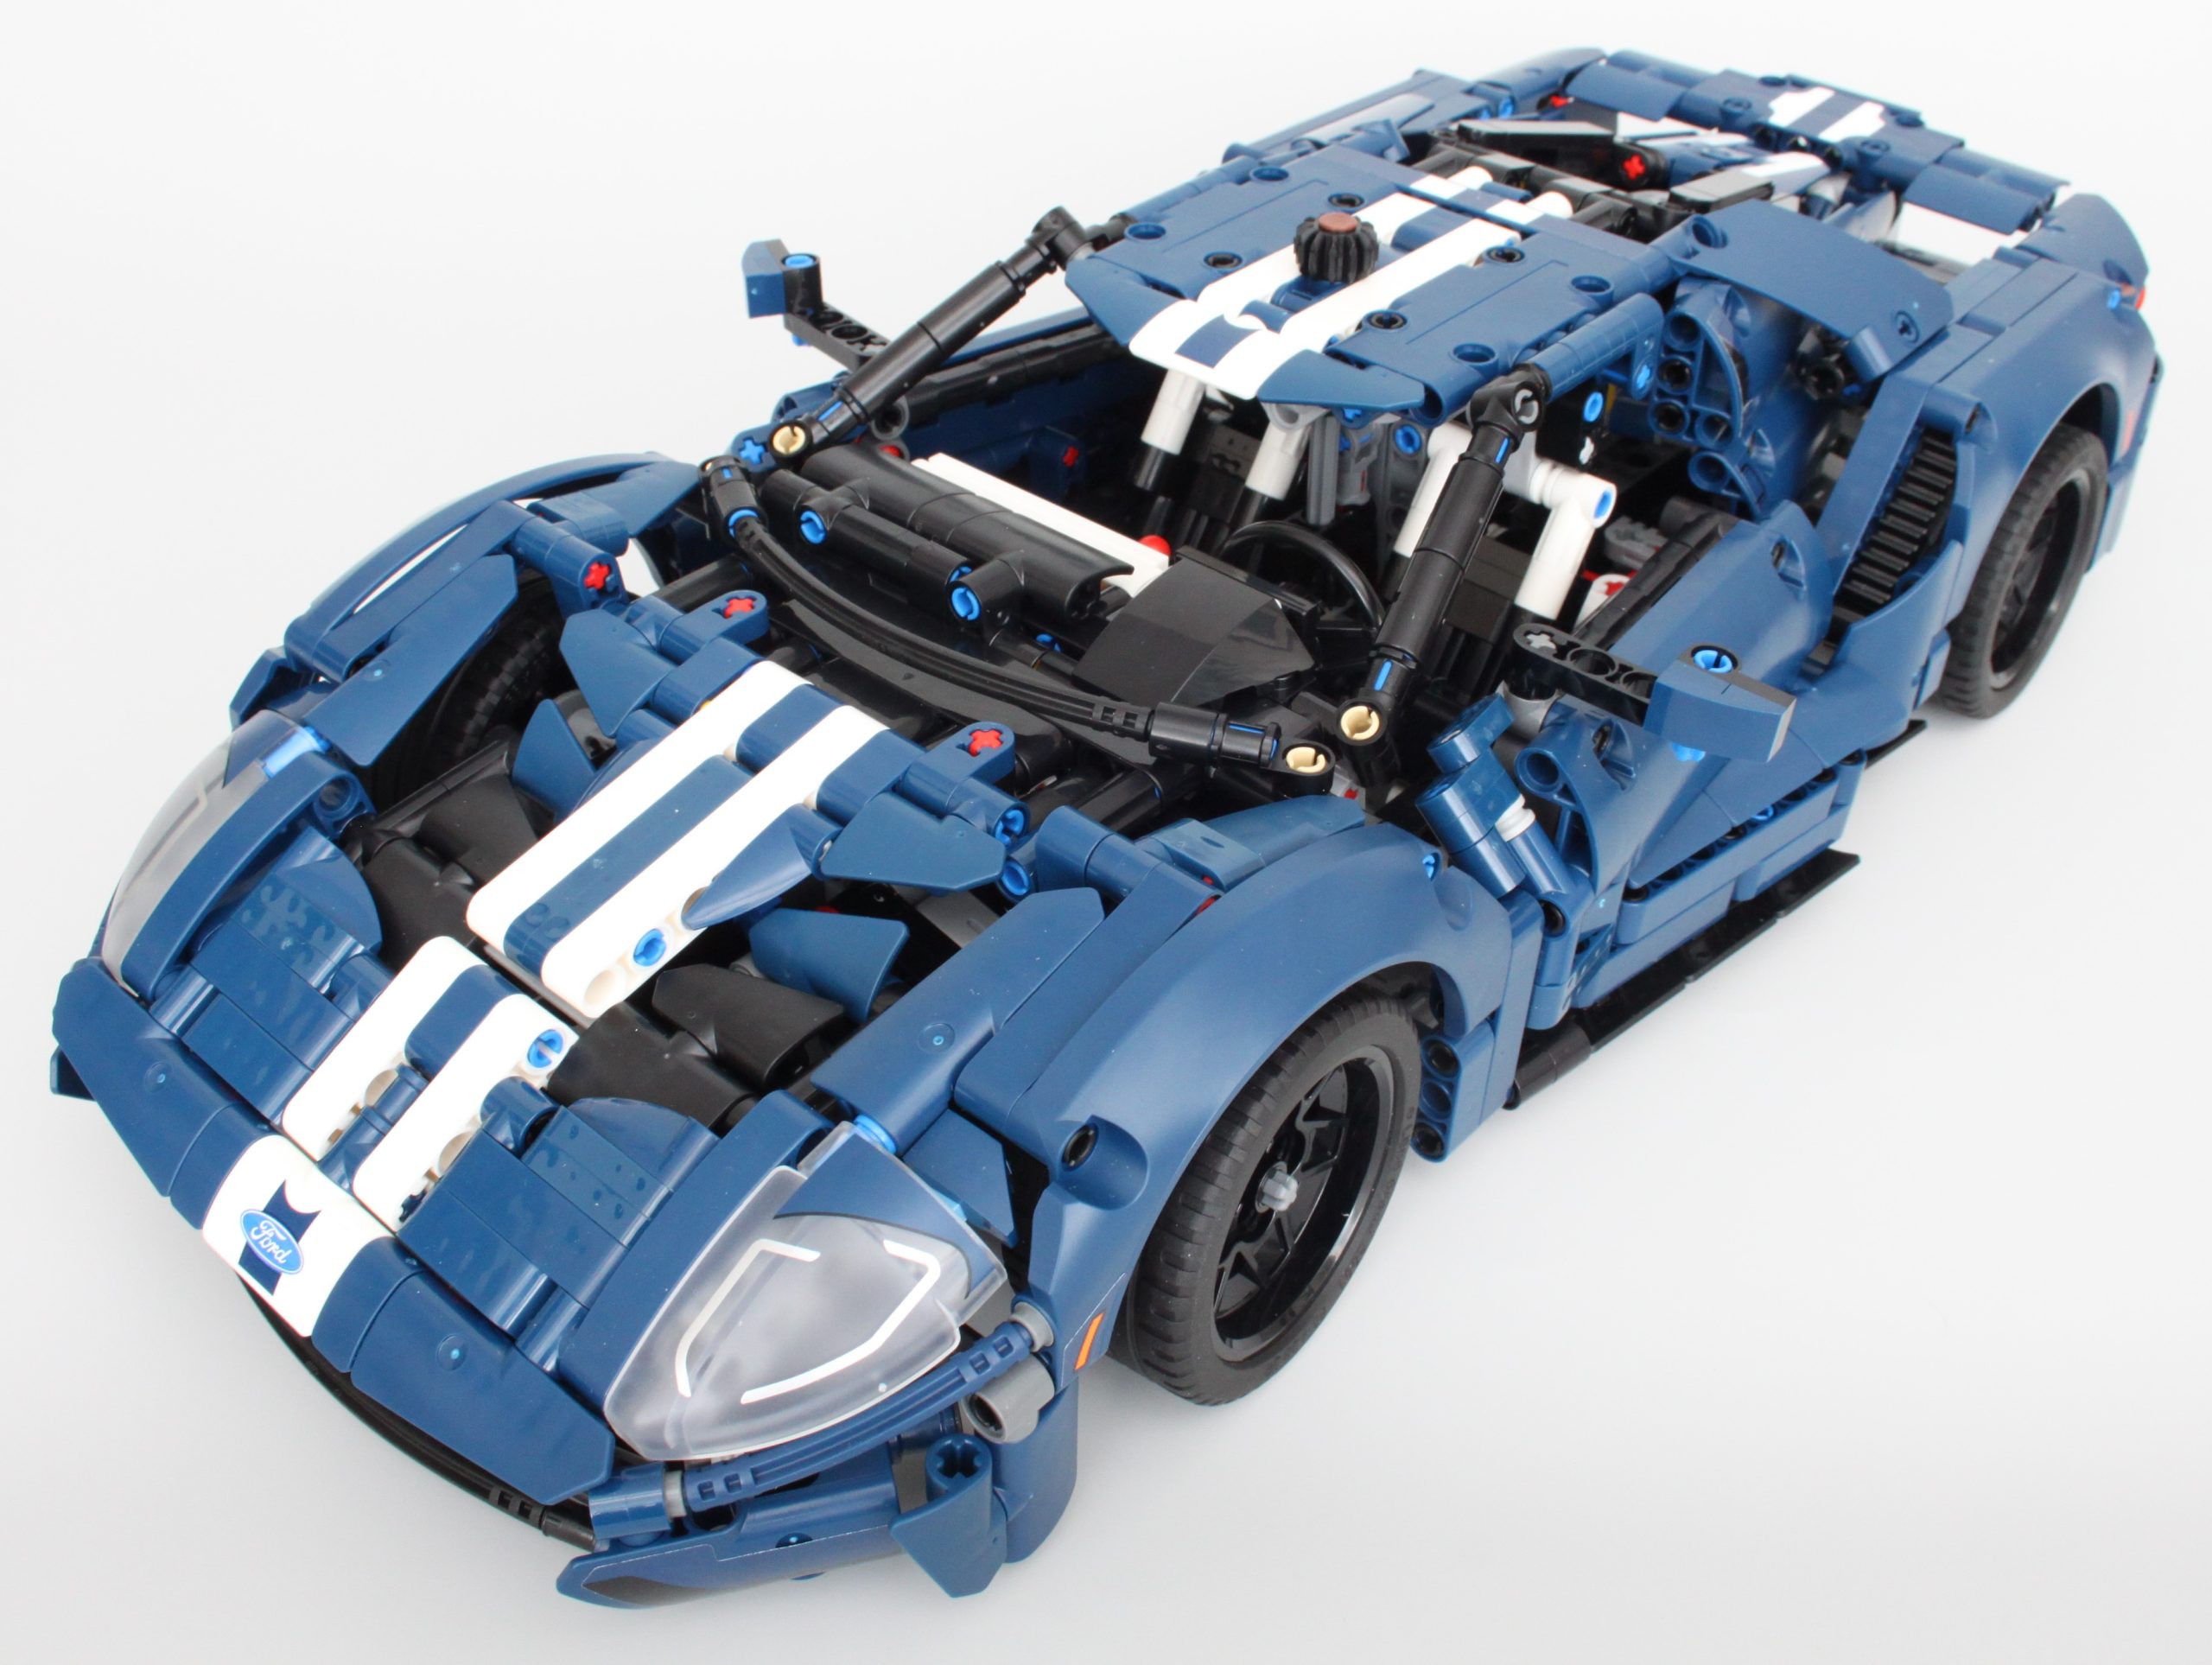 Buy LEGO Technic 2022 Ford GT Car Model Set for Adults 42154